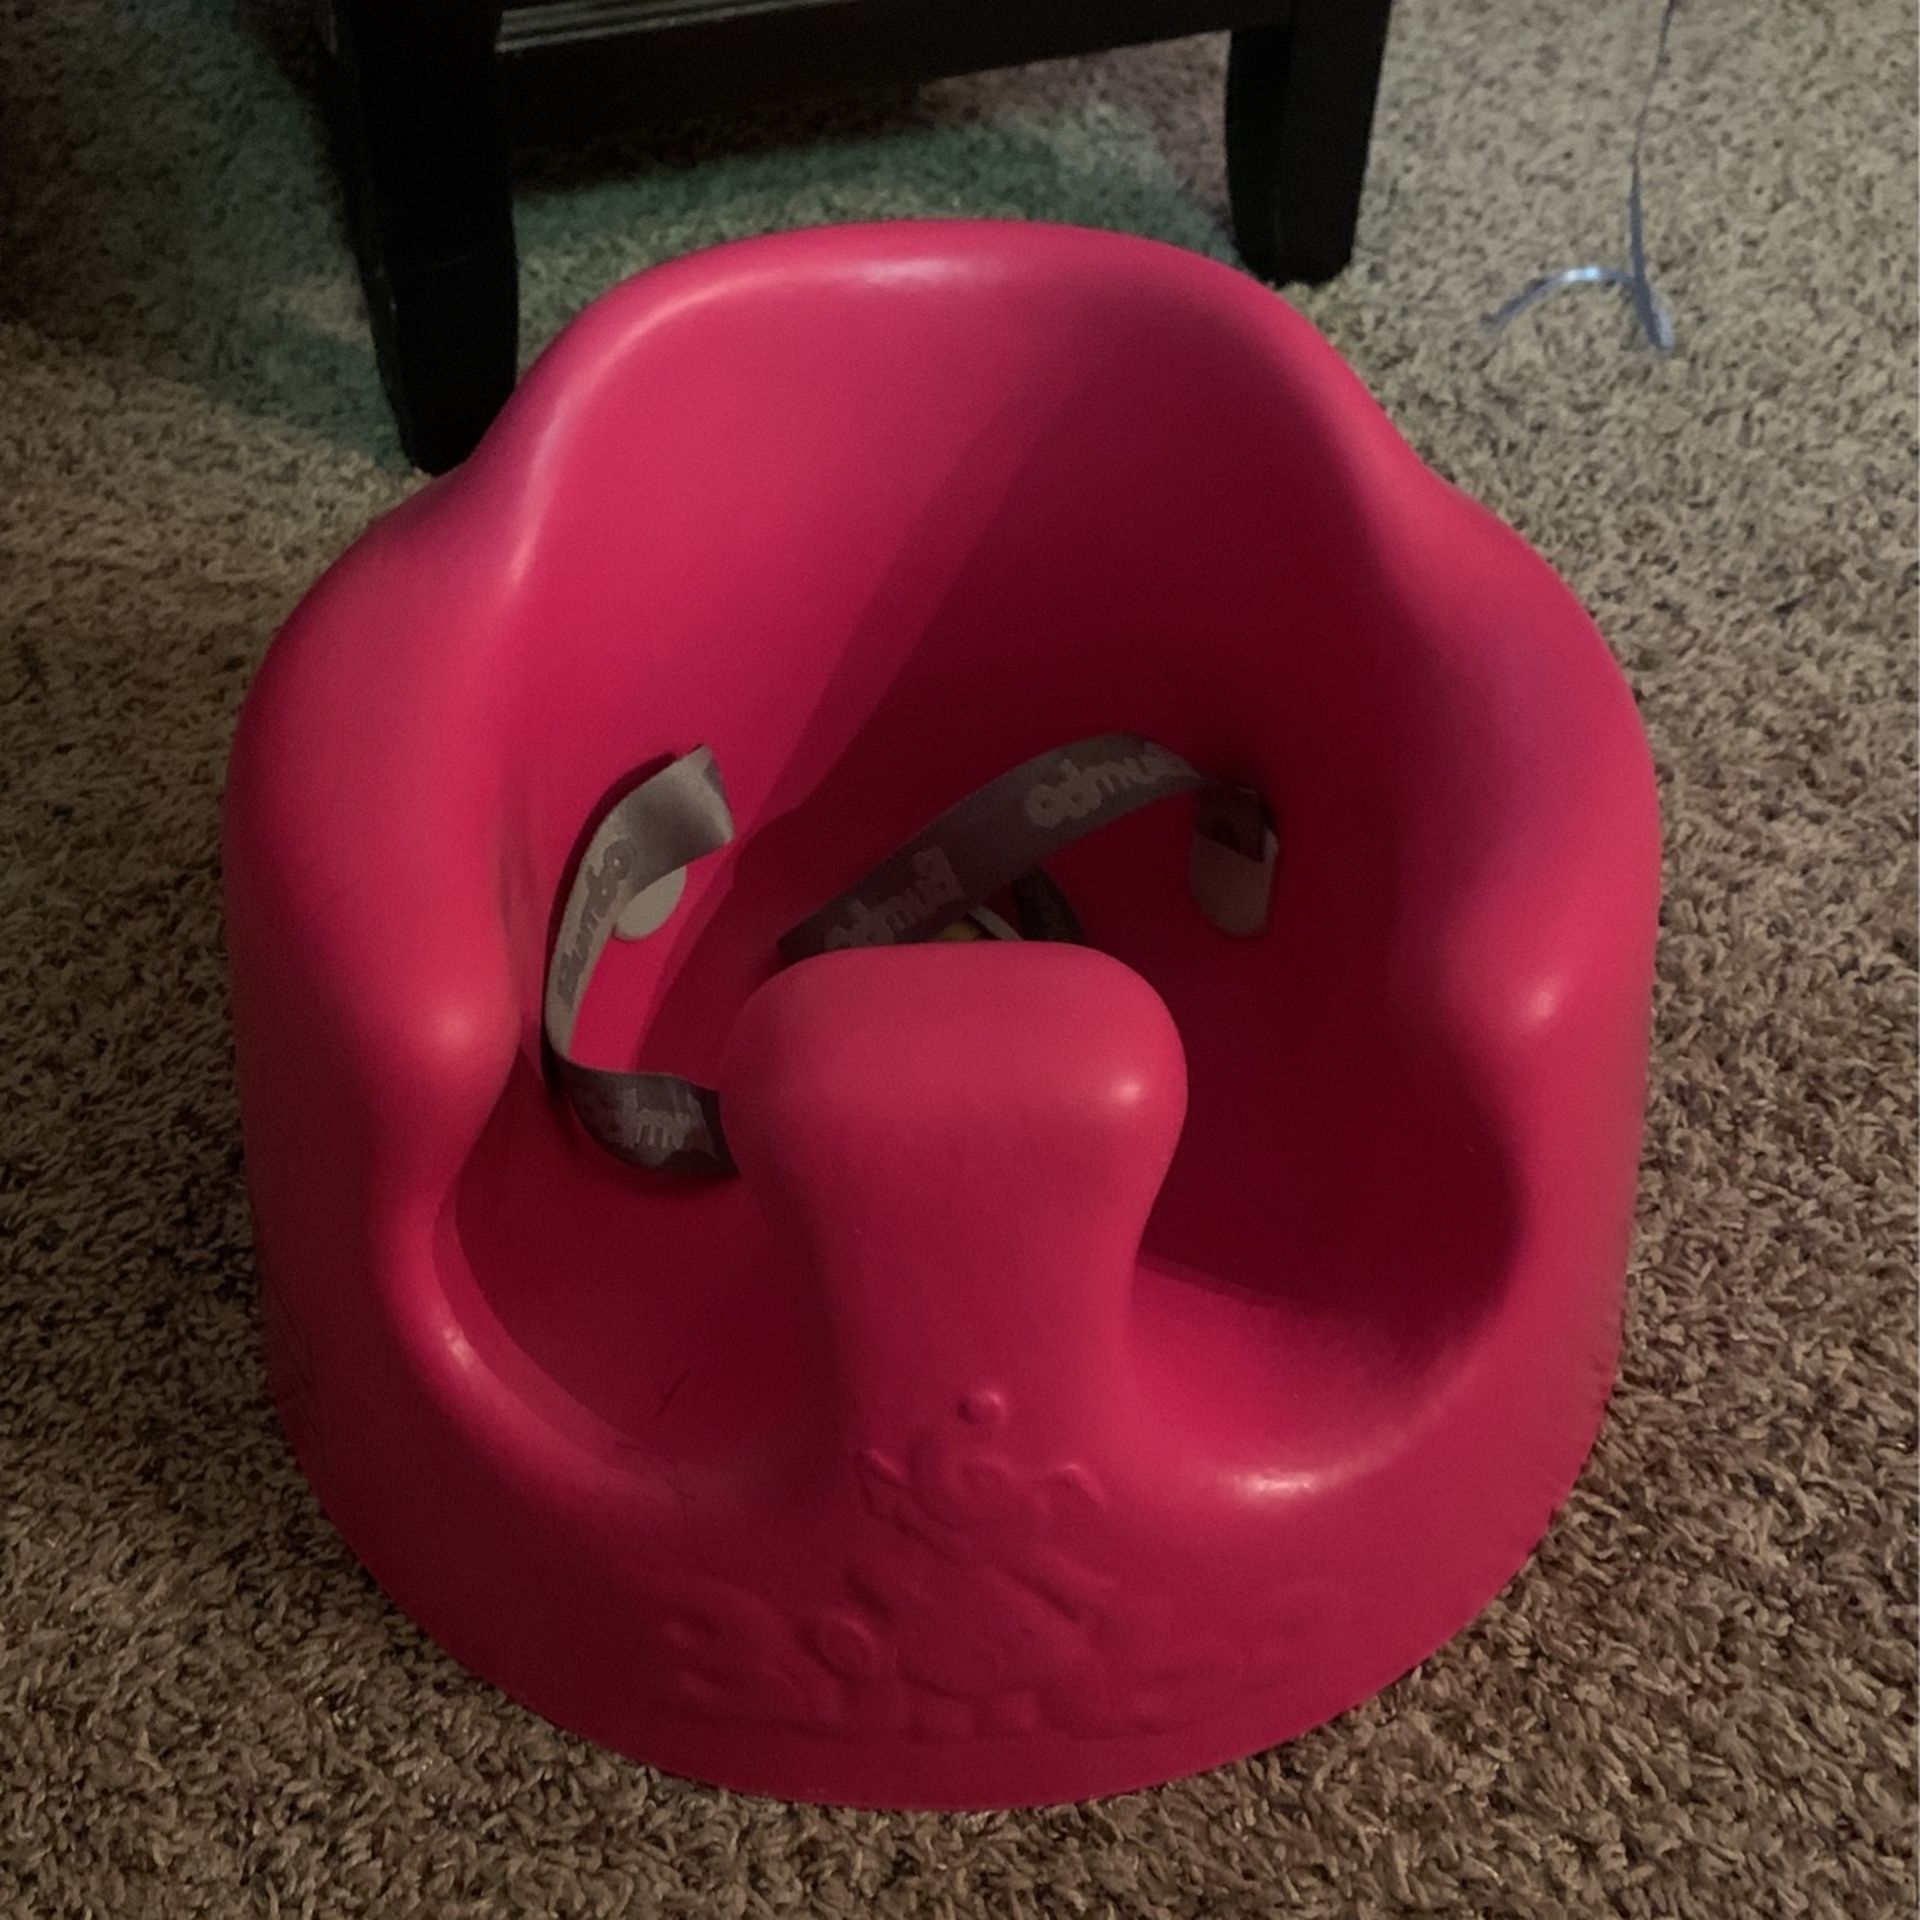 Pink Baby Chair